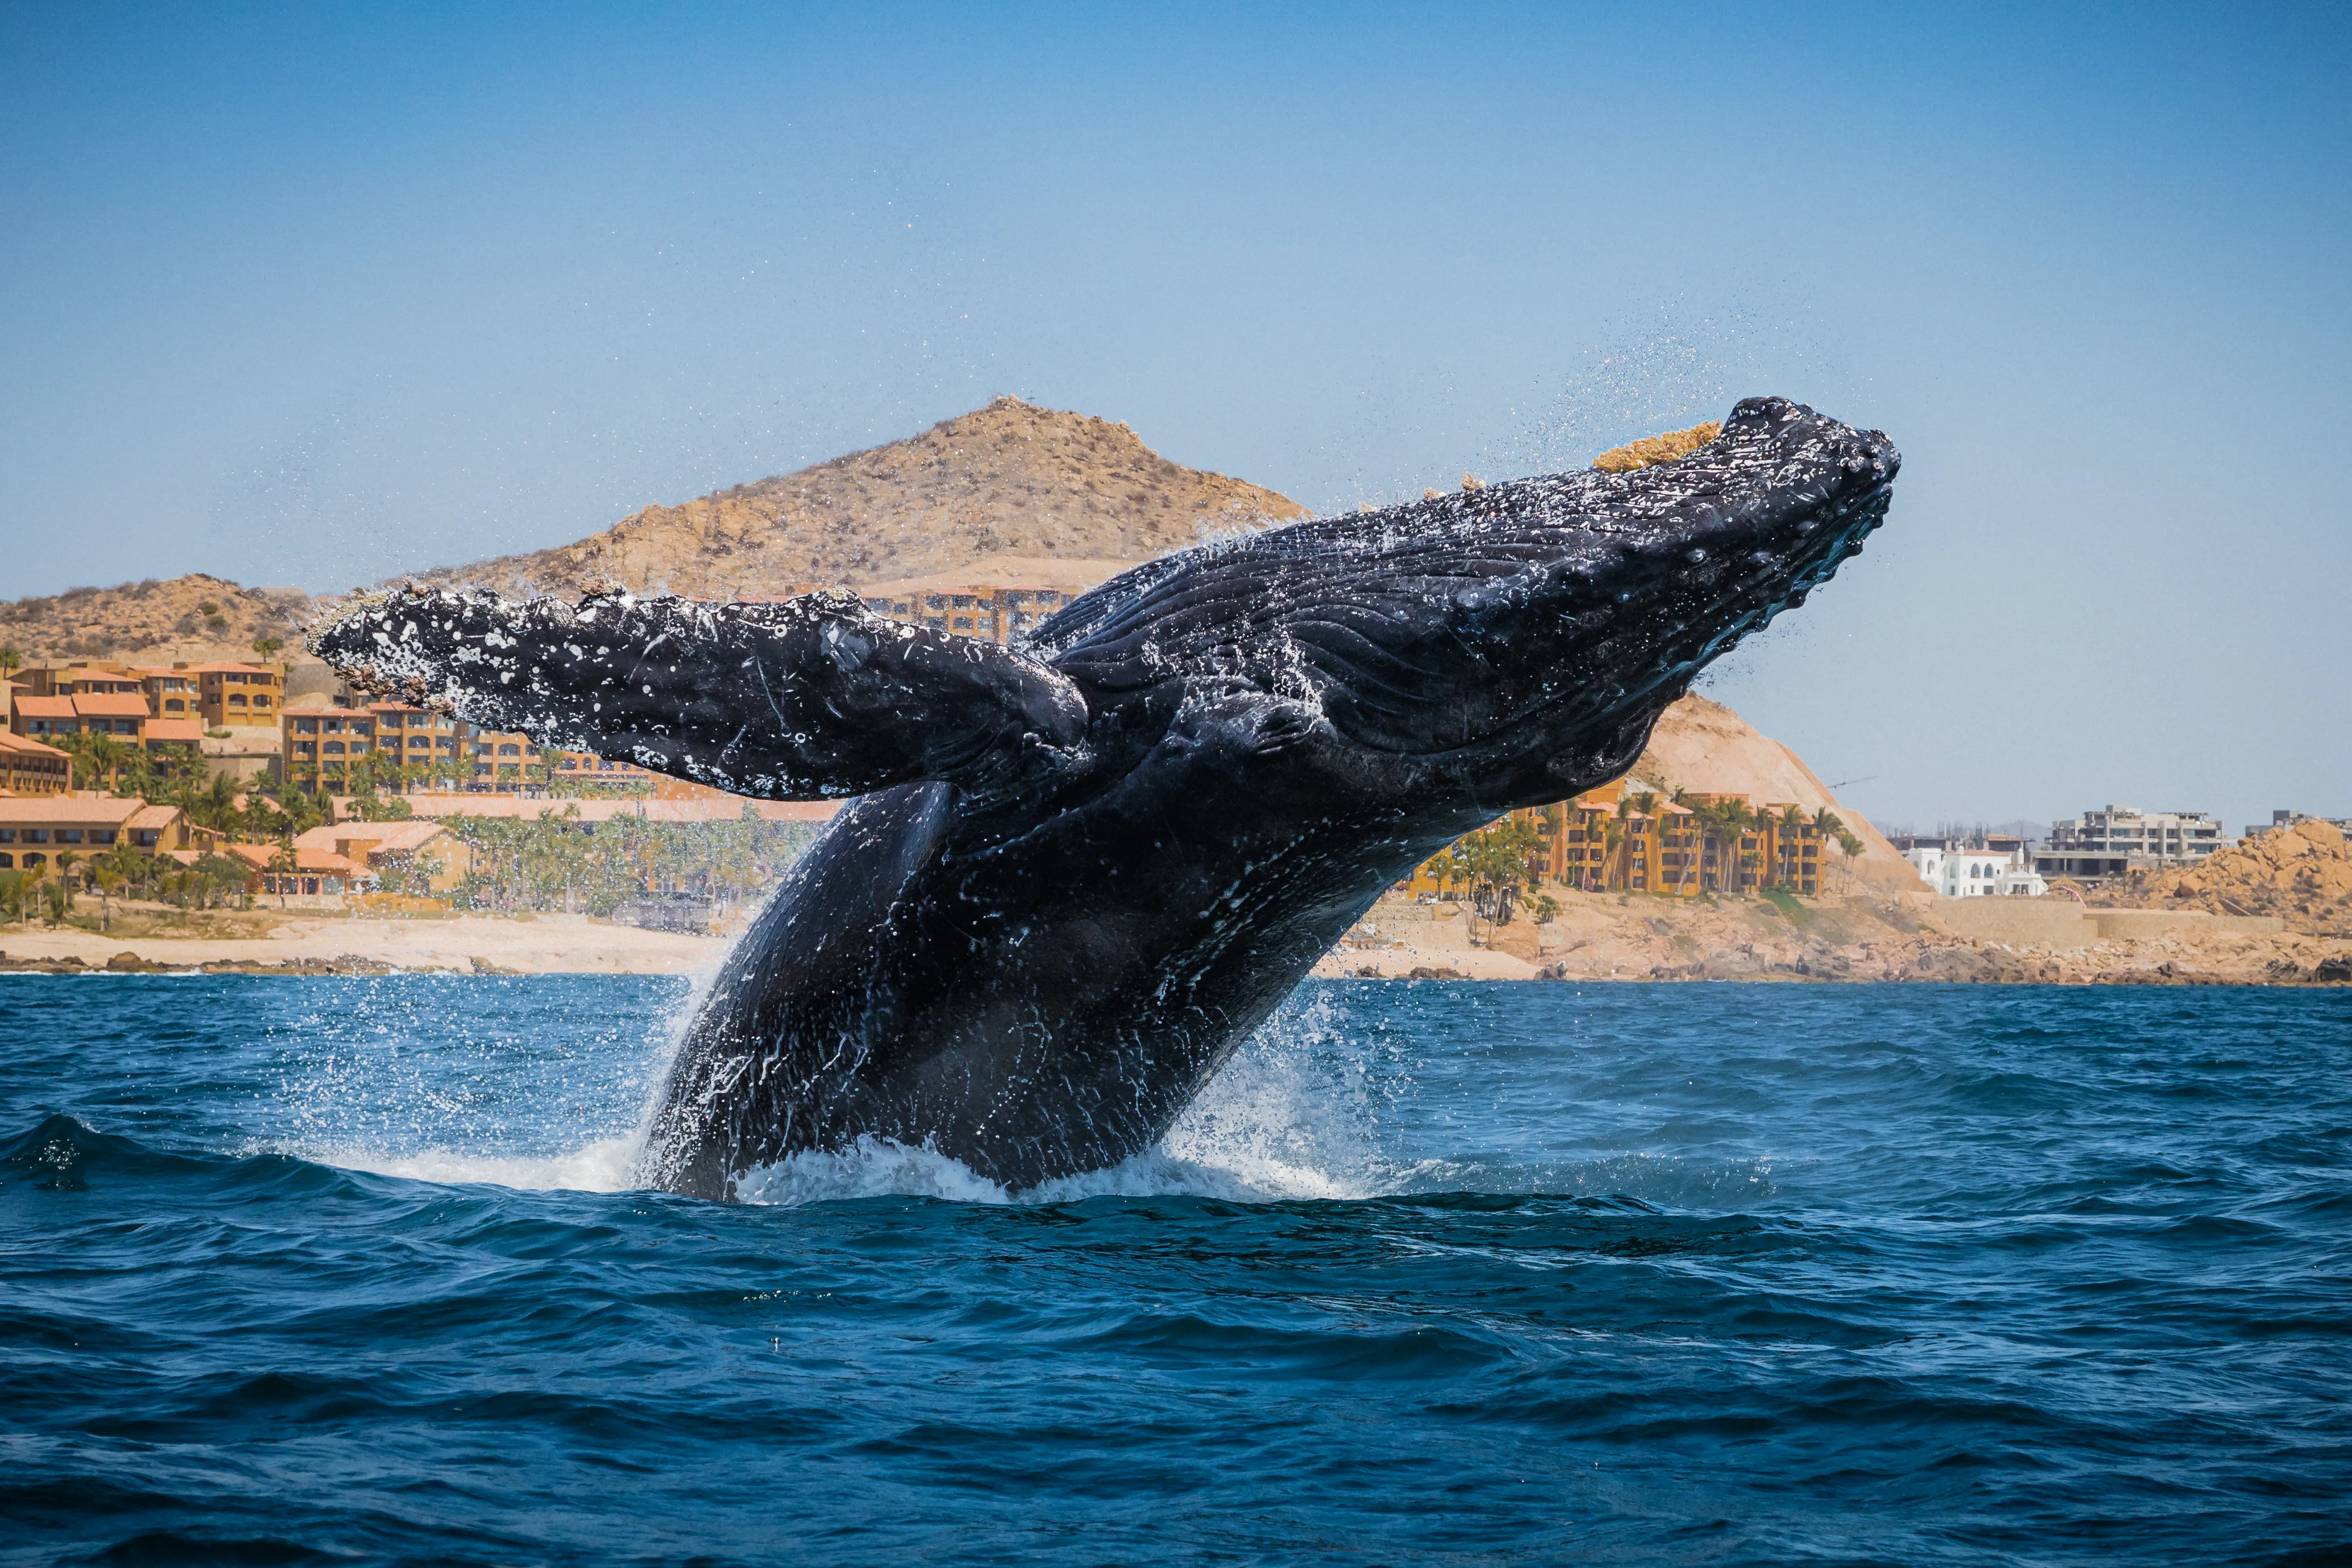 210313-ms-ssser-sa-humpback-whale-breaches-in-front-of-cabo-san-lucas-002-69a8426_atem